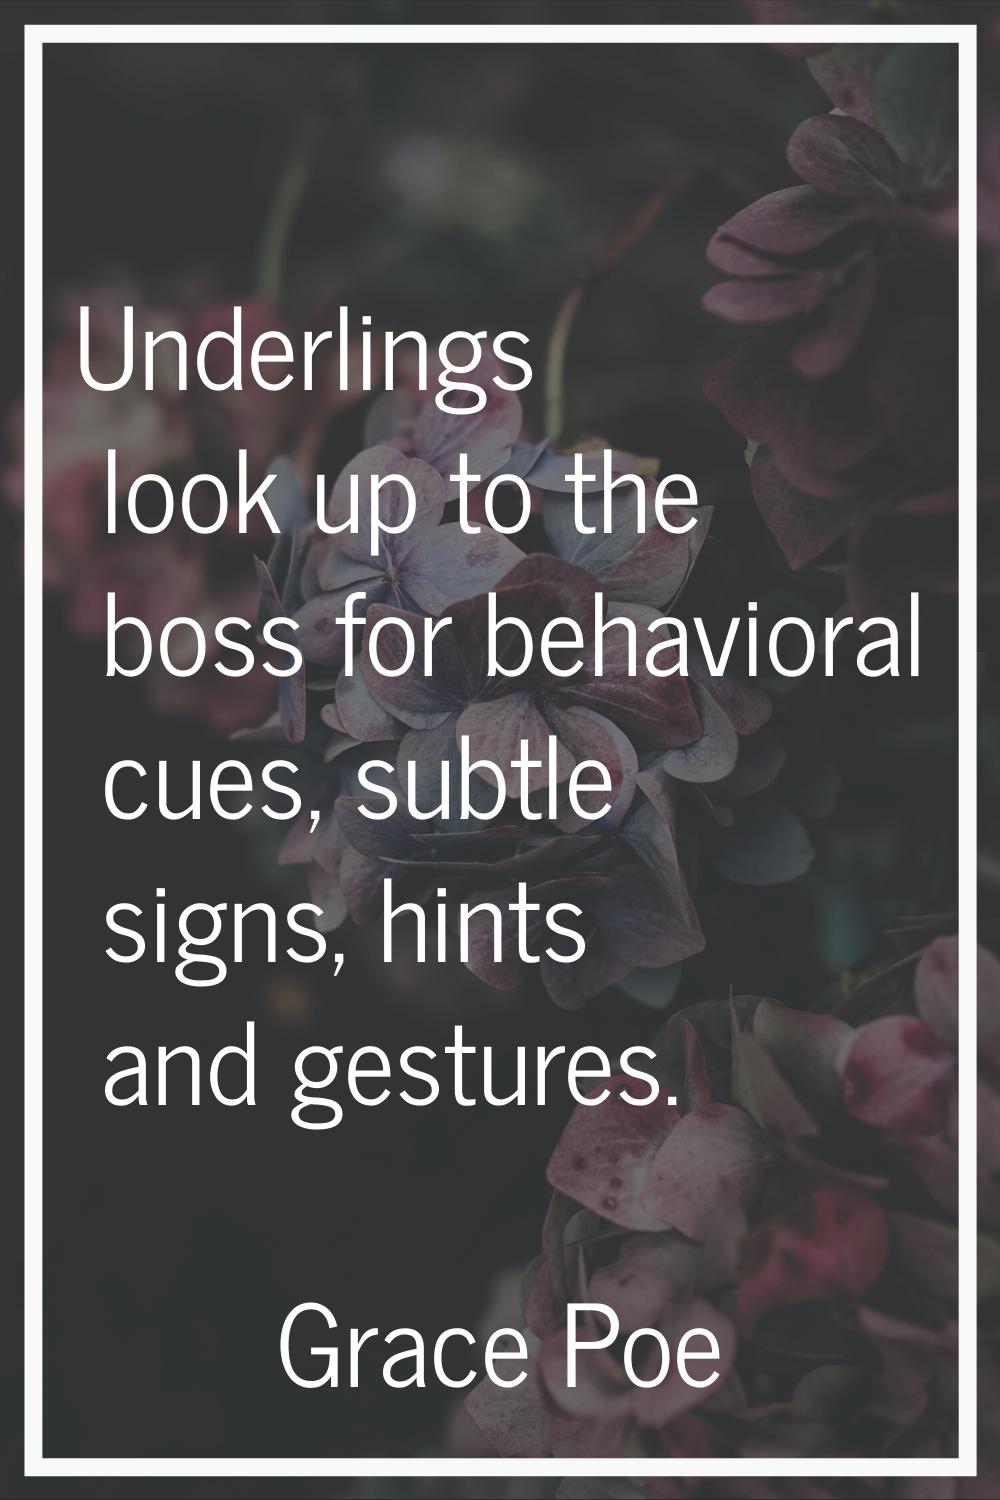 Underlings look up to the boss for behavioral cues, subtle signs, hints and gestures.